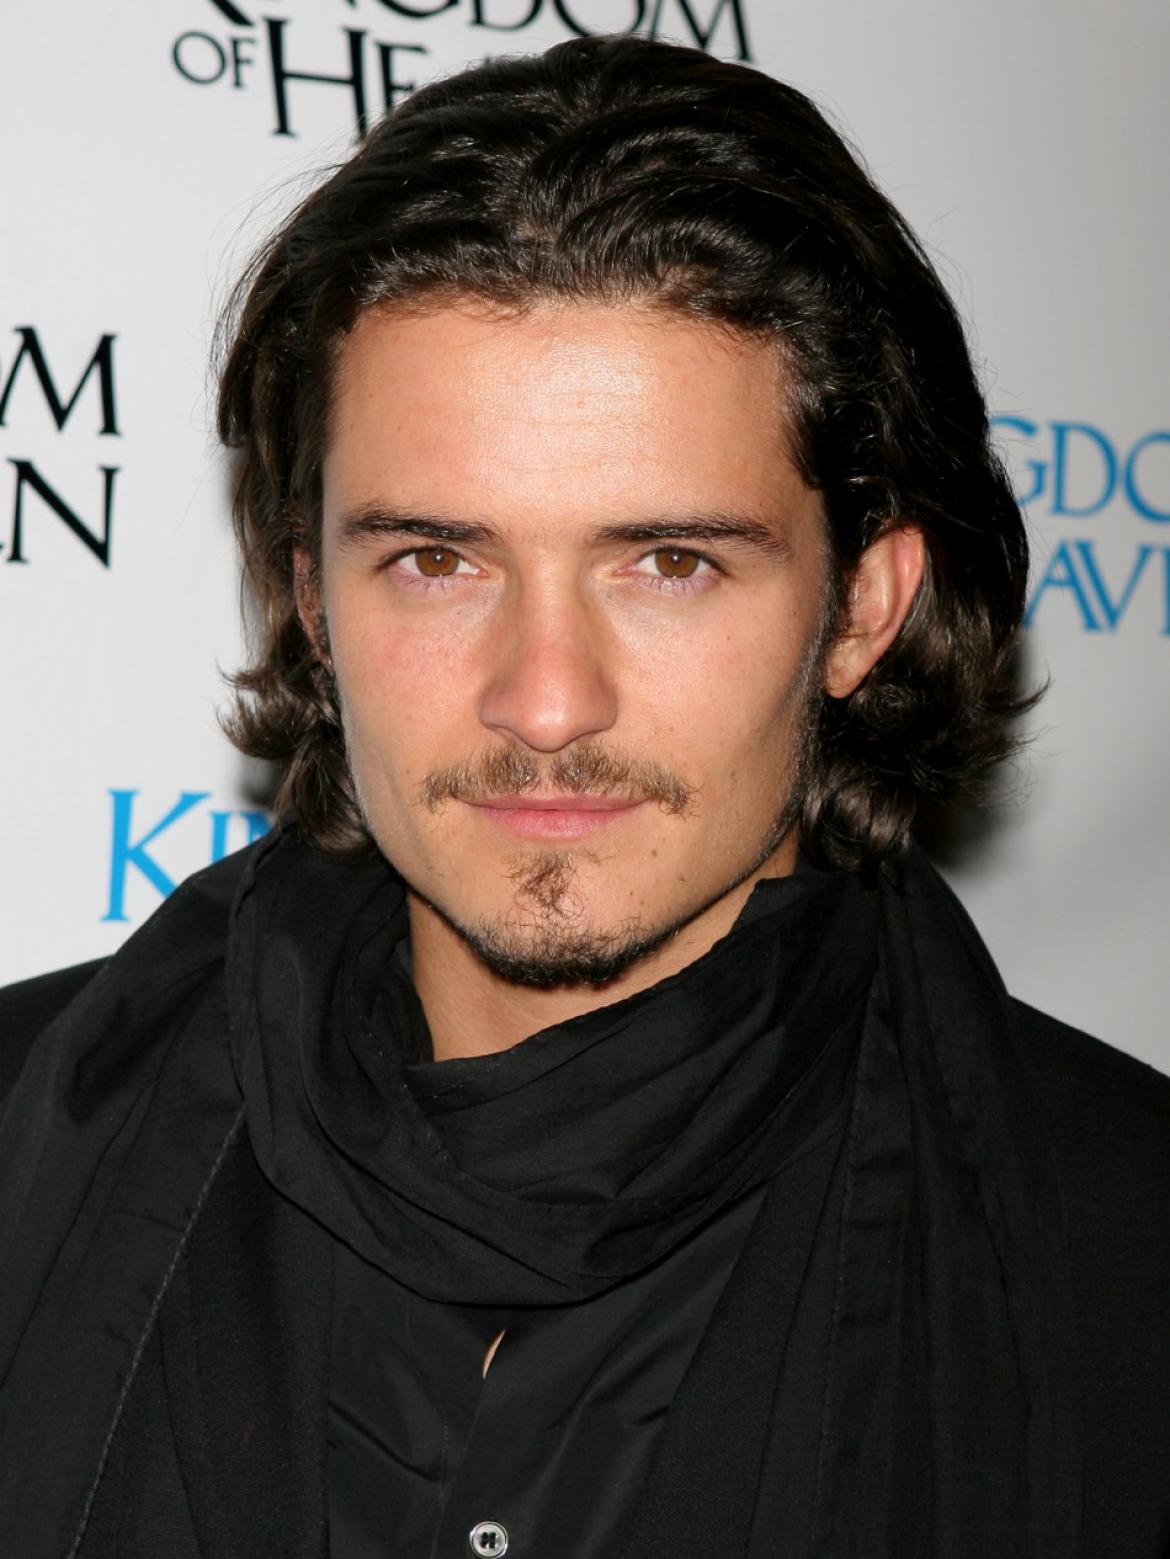 HD Quality Wallpaper | Collection: Celebrity, 1170x1559 Orlando Bloom